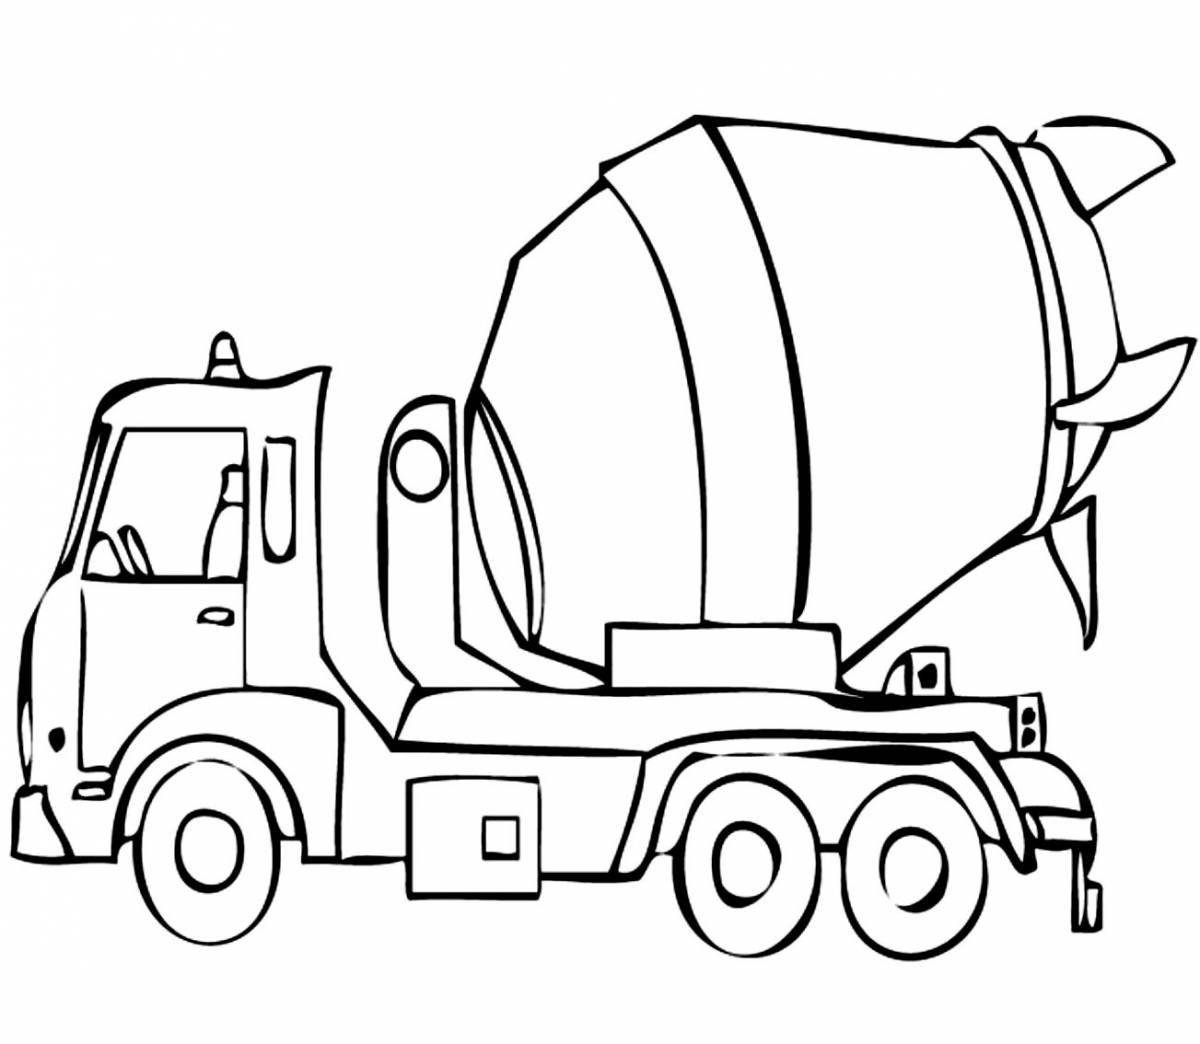 Playful super truck coloring page